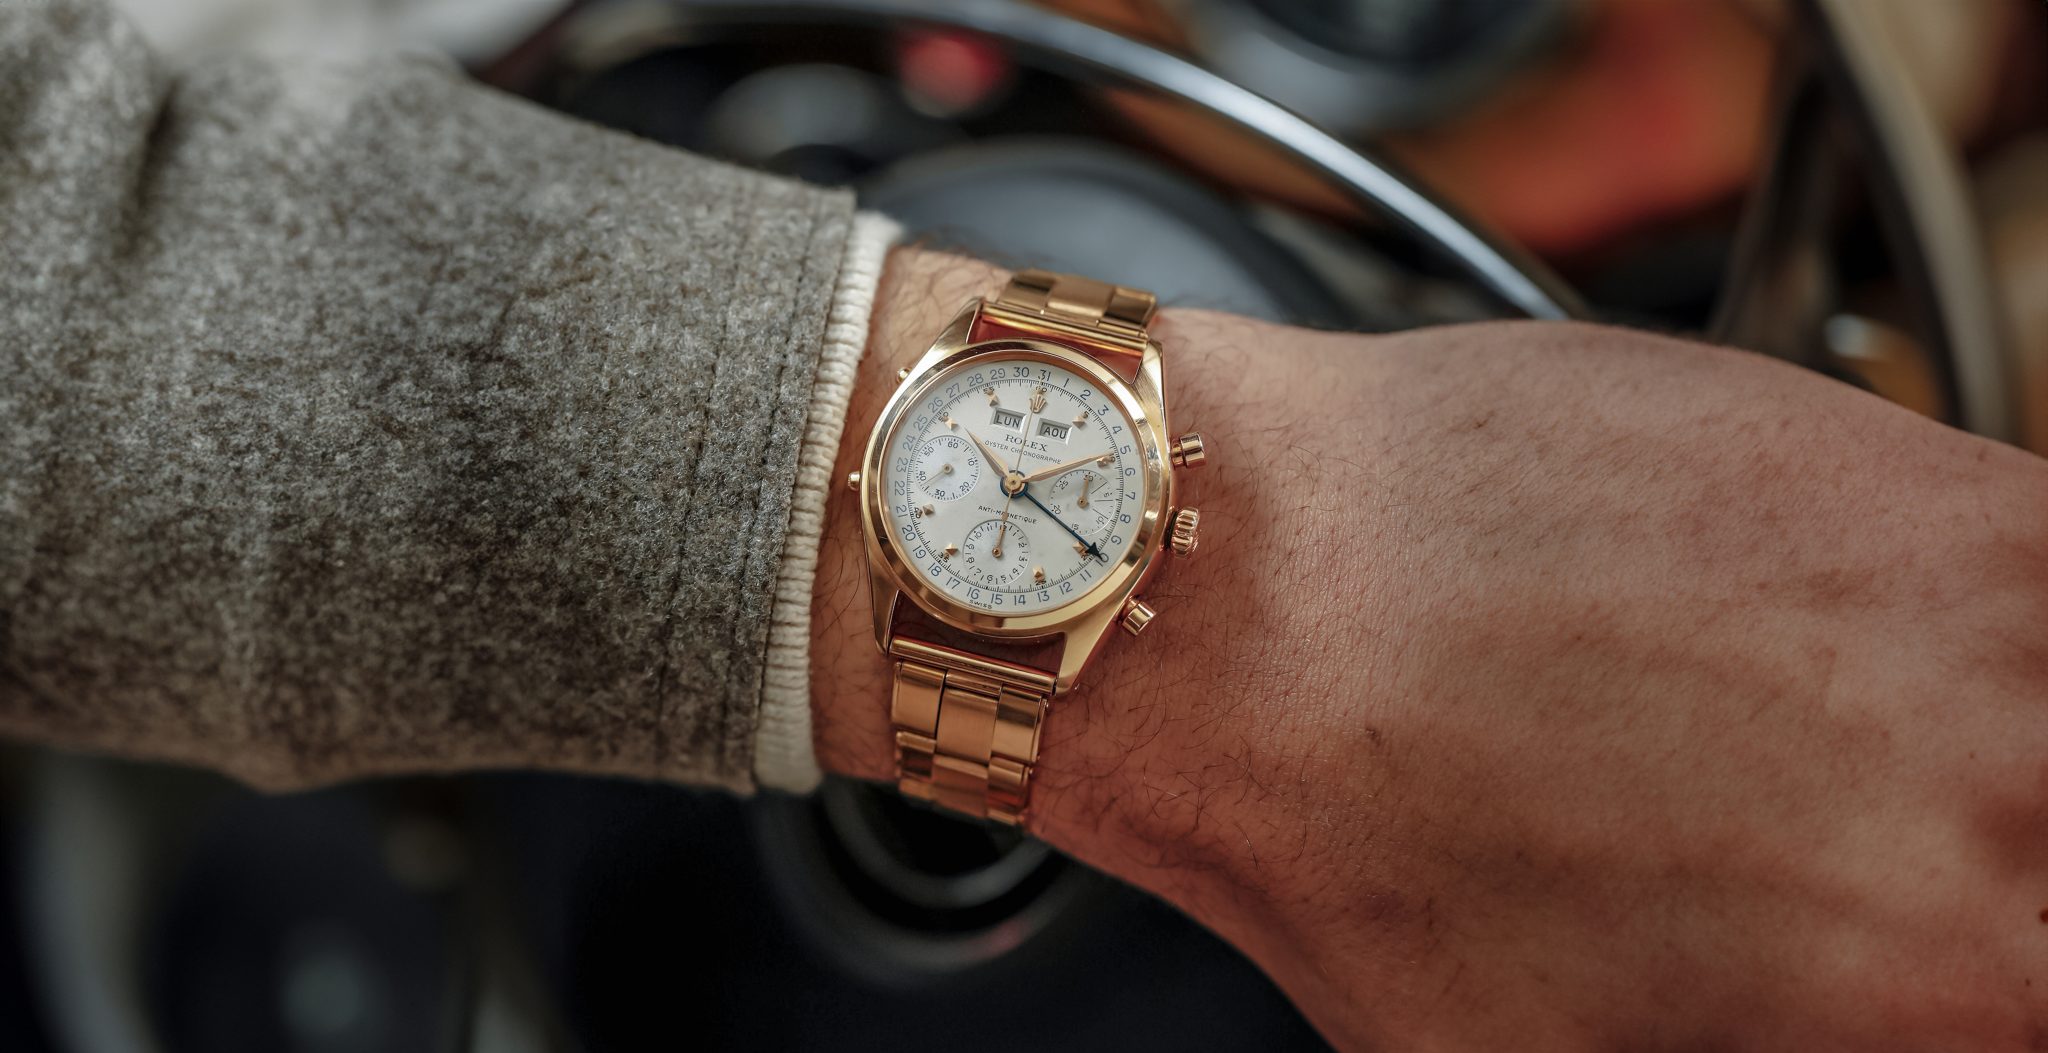 6036-Rolex-Jean-Claude-Killy-Pink-Gold